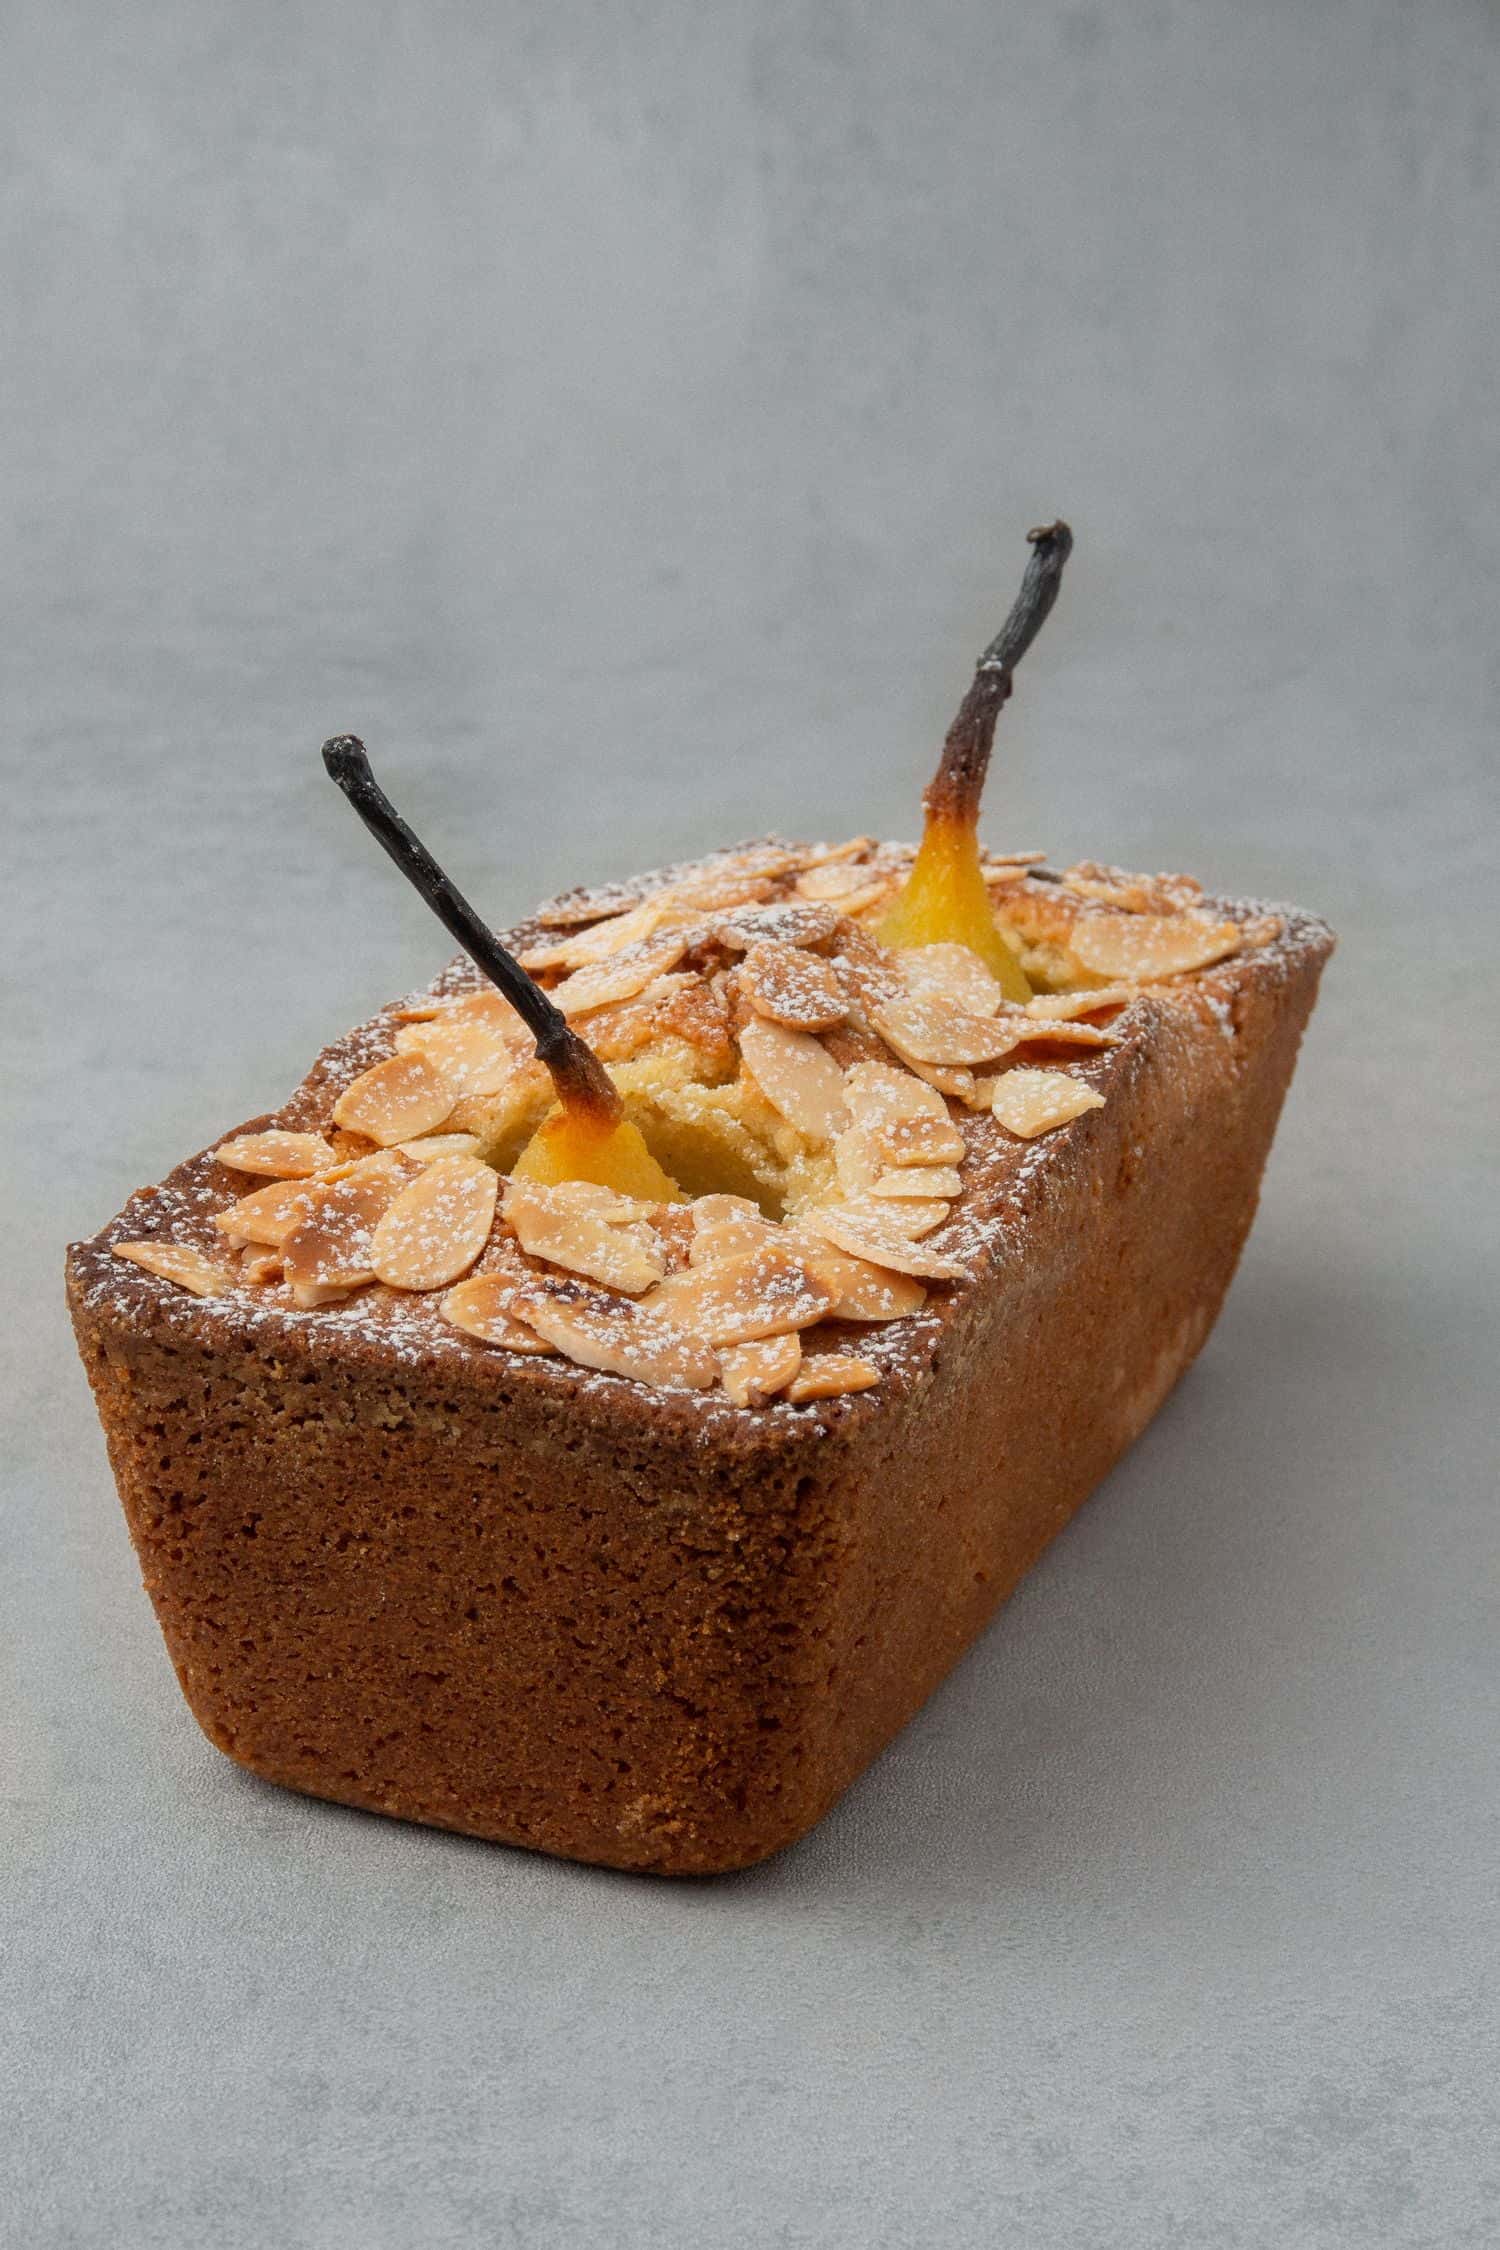 Pear loaf with almond decoration.